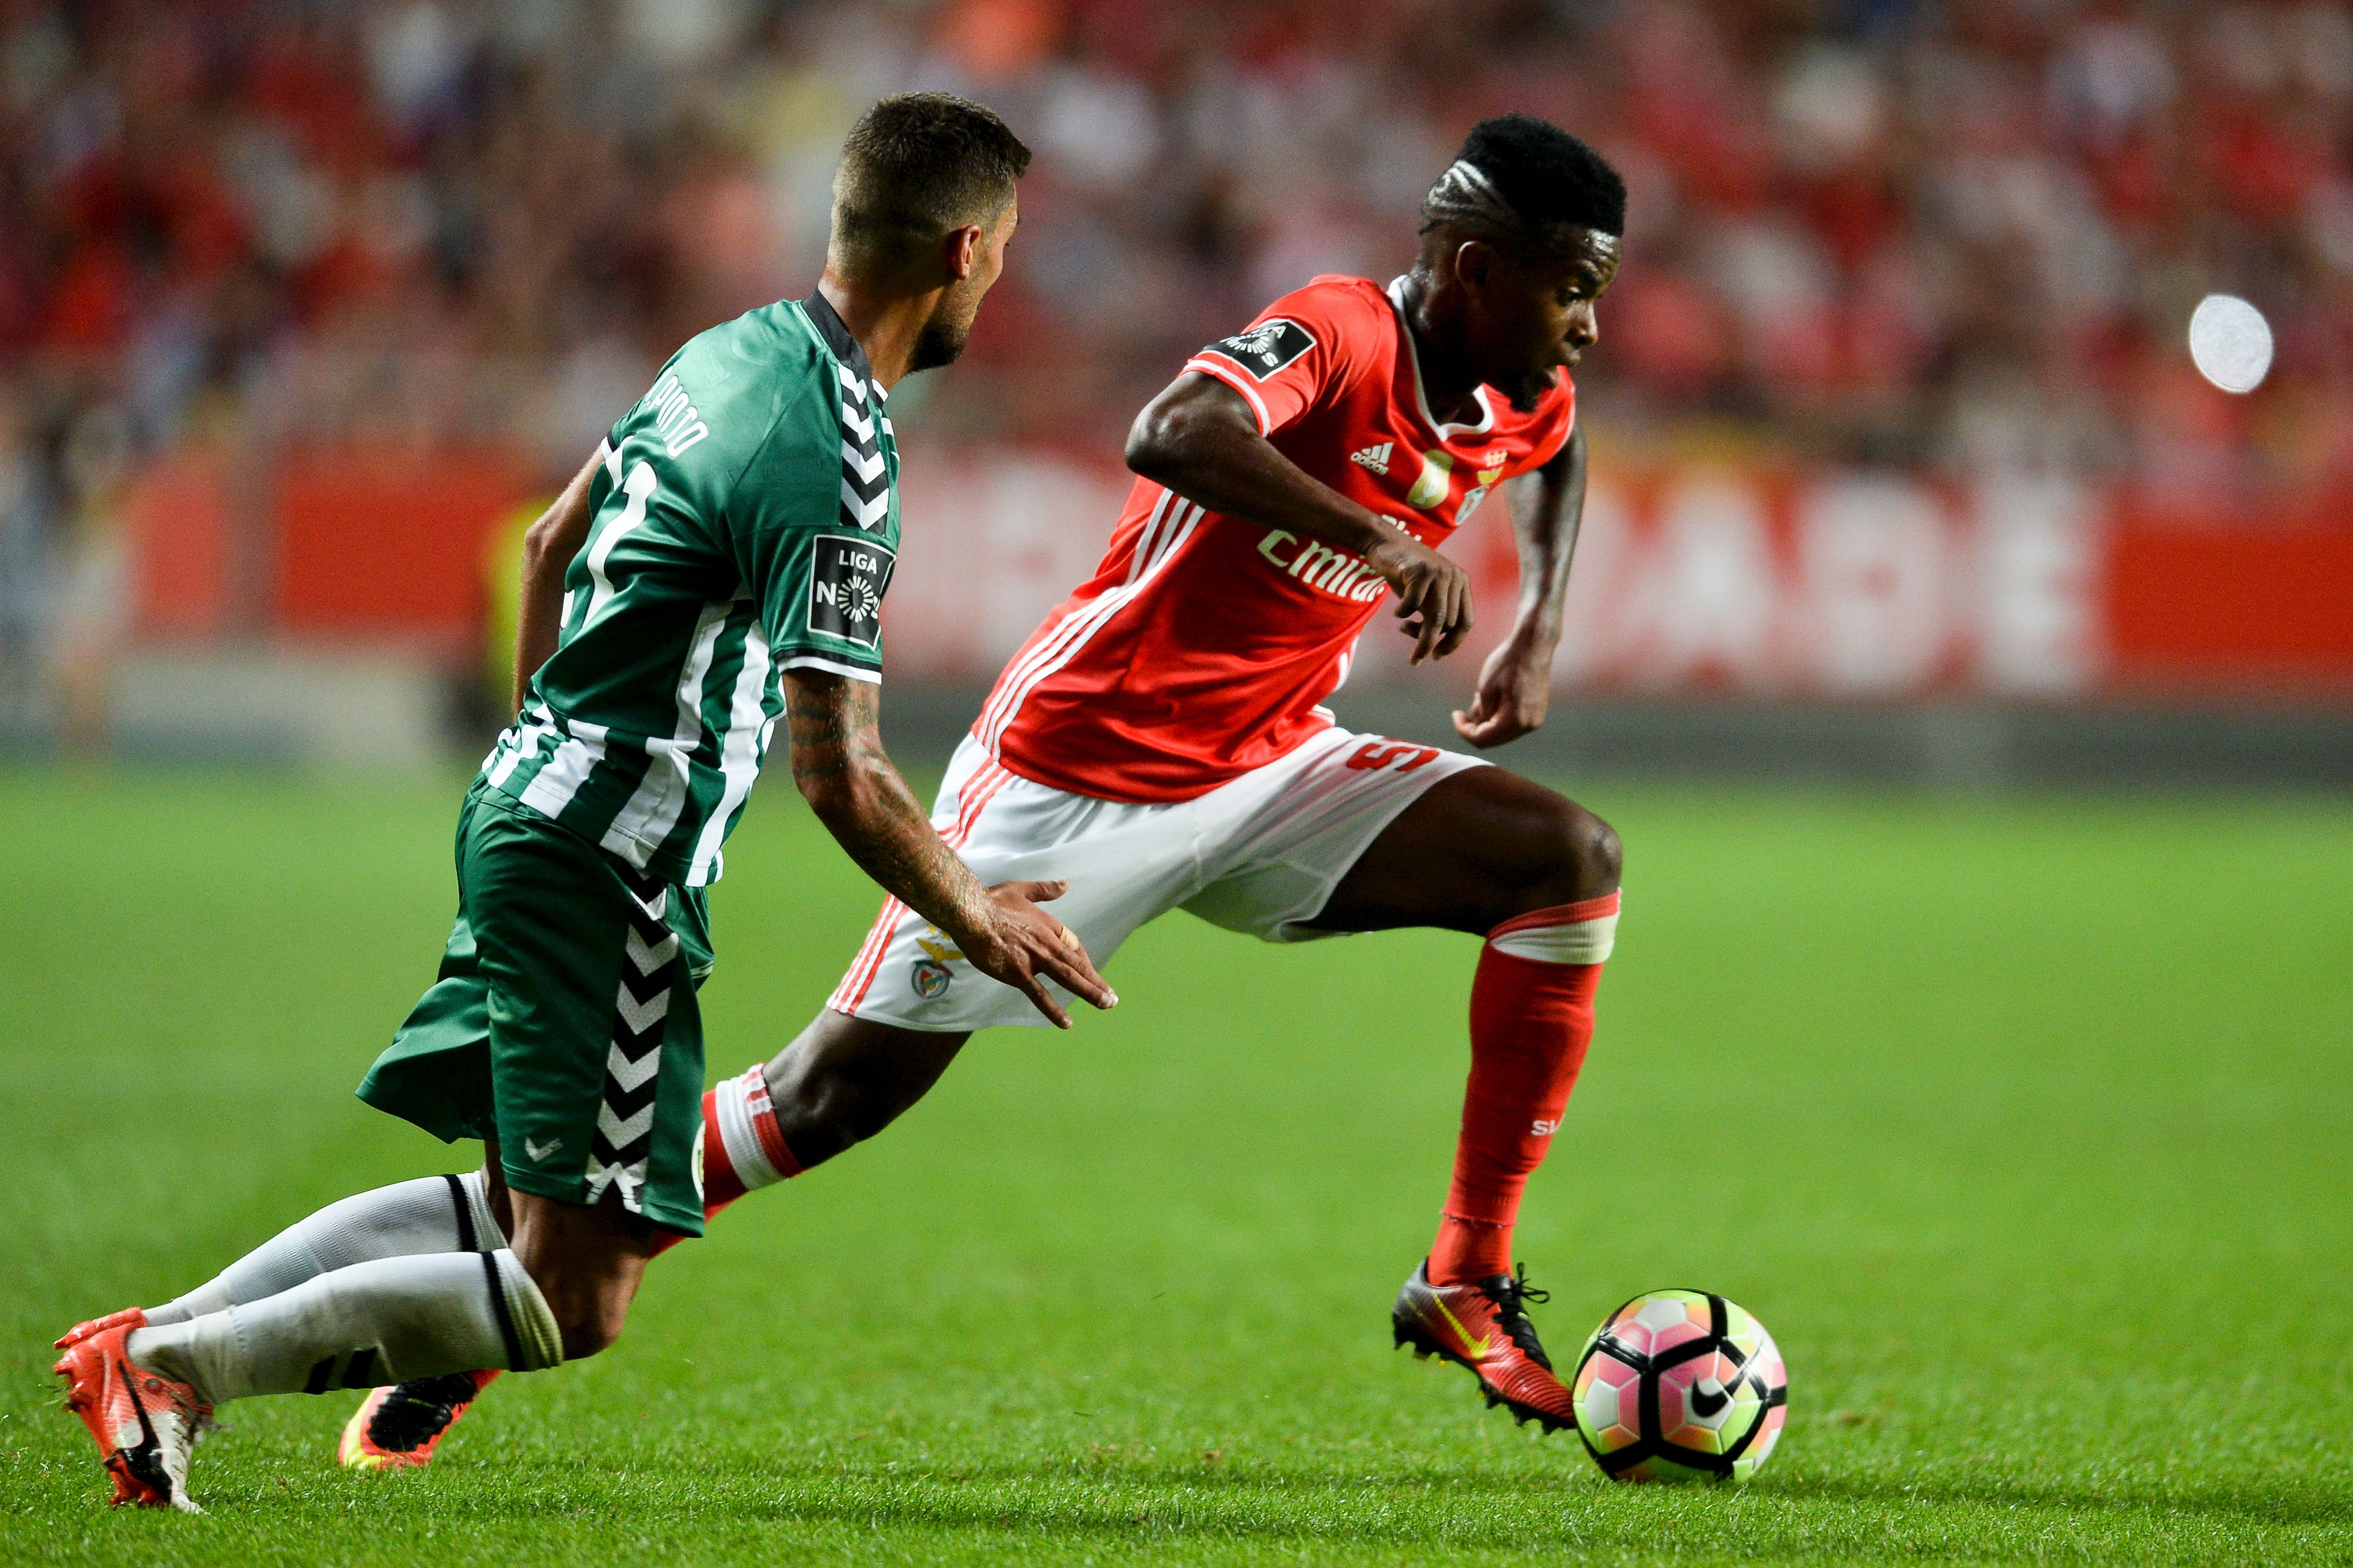 Benfica's defender Nelson Semedo (R) vies with Setubal's defender Nuno Pinto (L) during the Portuguese league football match SL Benfica vs Vitoria FC at the Luz stadium in Lisbon on August 21, 2016. / AFP / PATRICIA DE MELO MOREIRA        (Photo credit should read PATRICIA DE MELO MOREIRA/AFP/Getty Images)